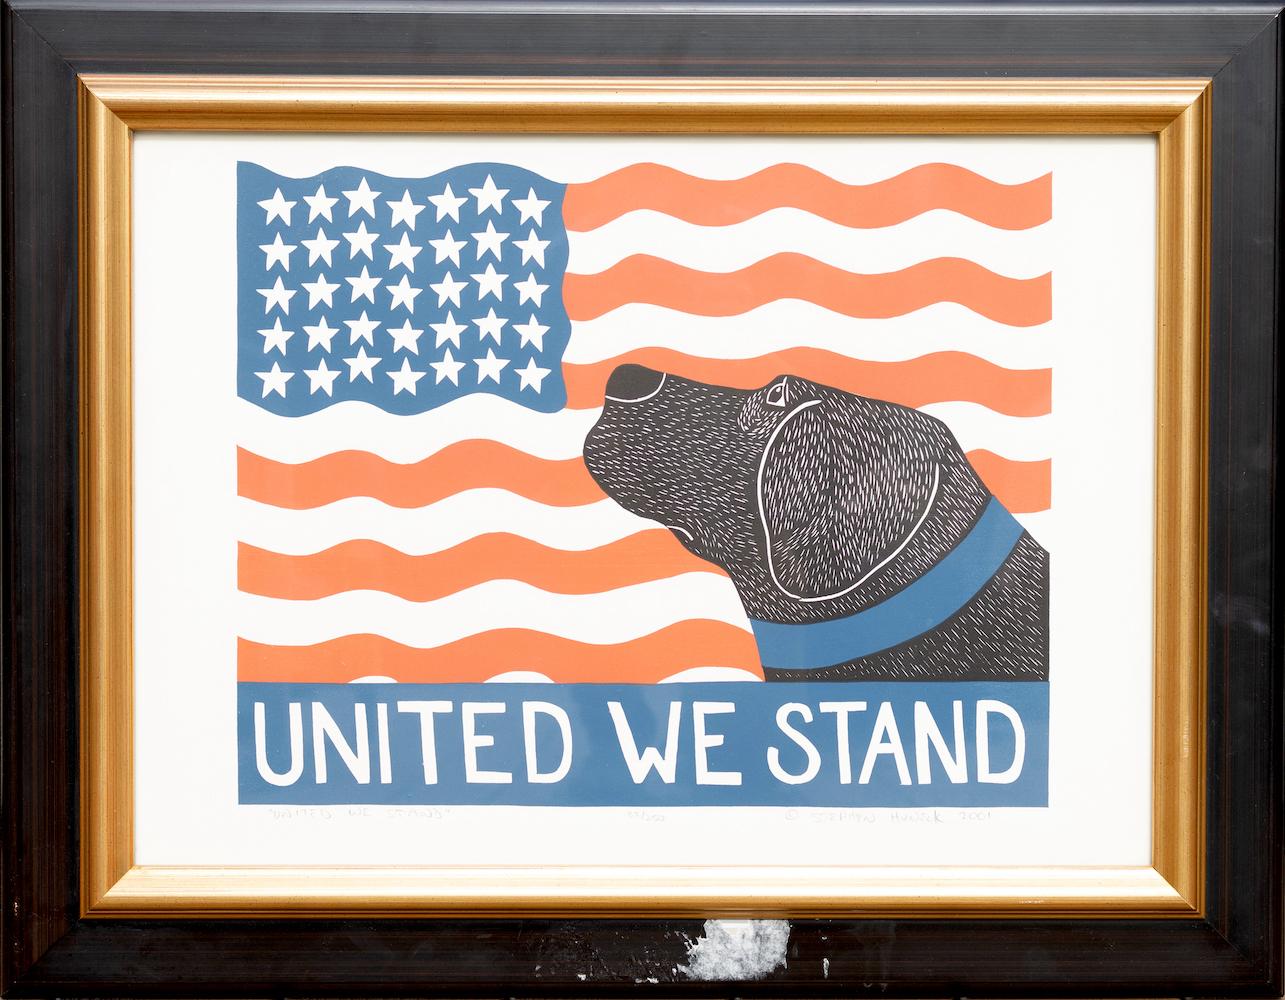 This piece depicts an American flag with a dog looking up to it and the words 